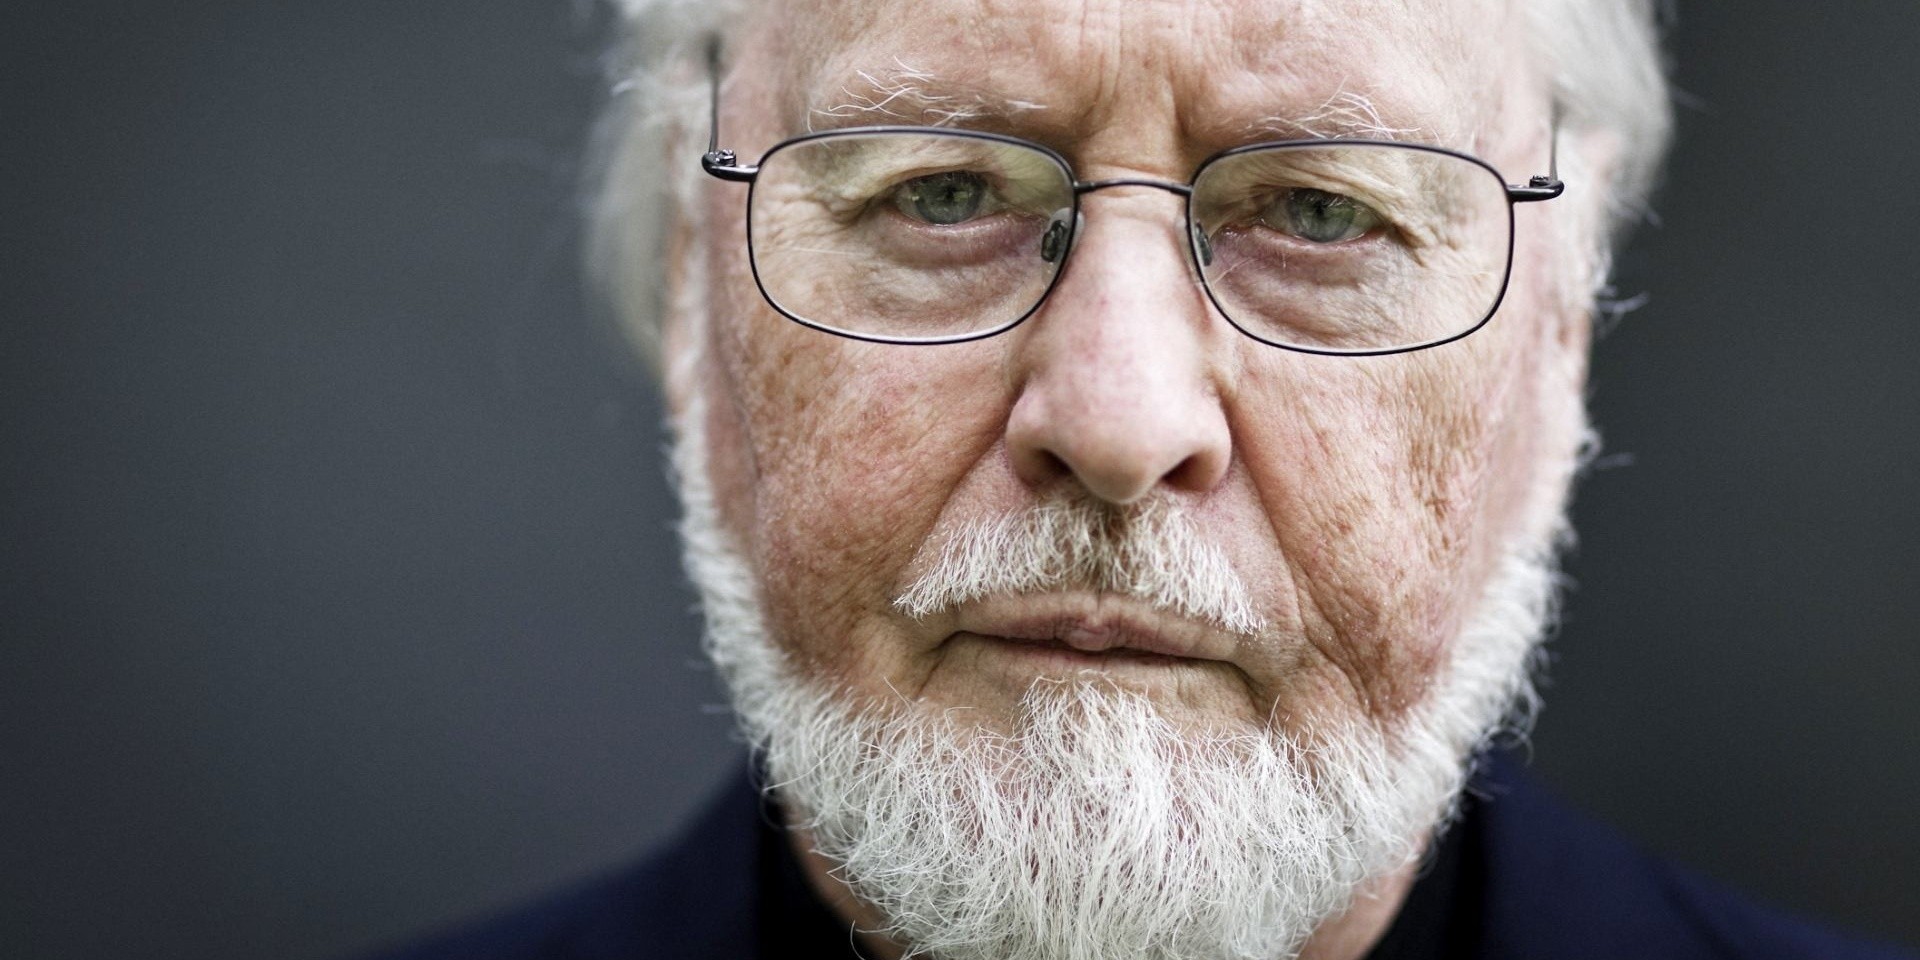 Episode IX of the Star Wars saga, out 2019, will be composer John Williams' last 